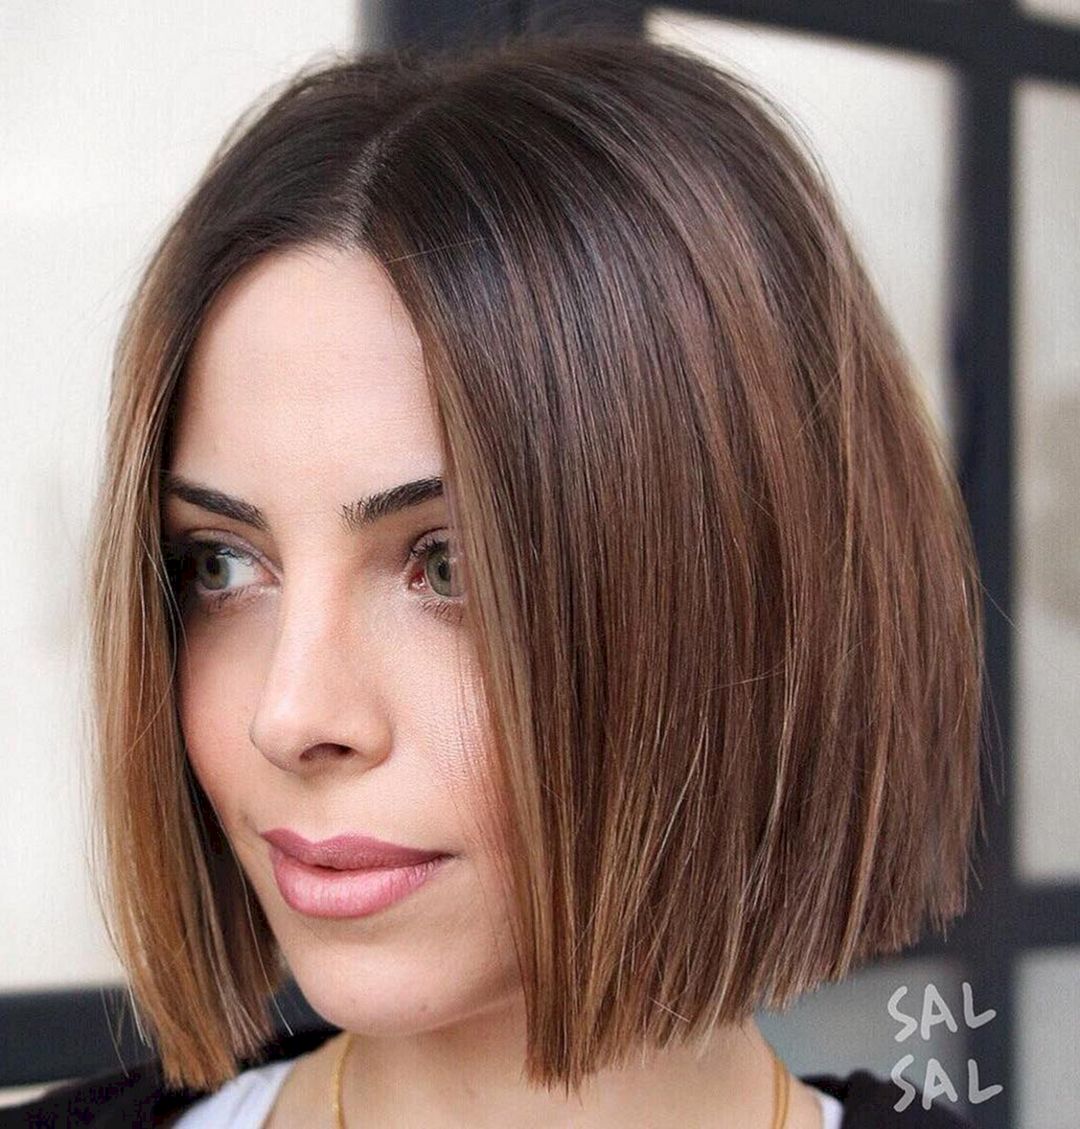 Blunt bobs from hairstylery